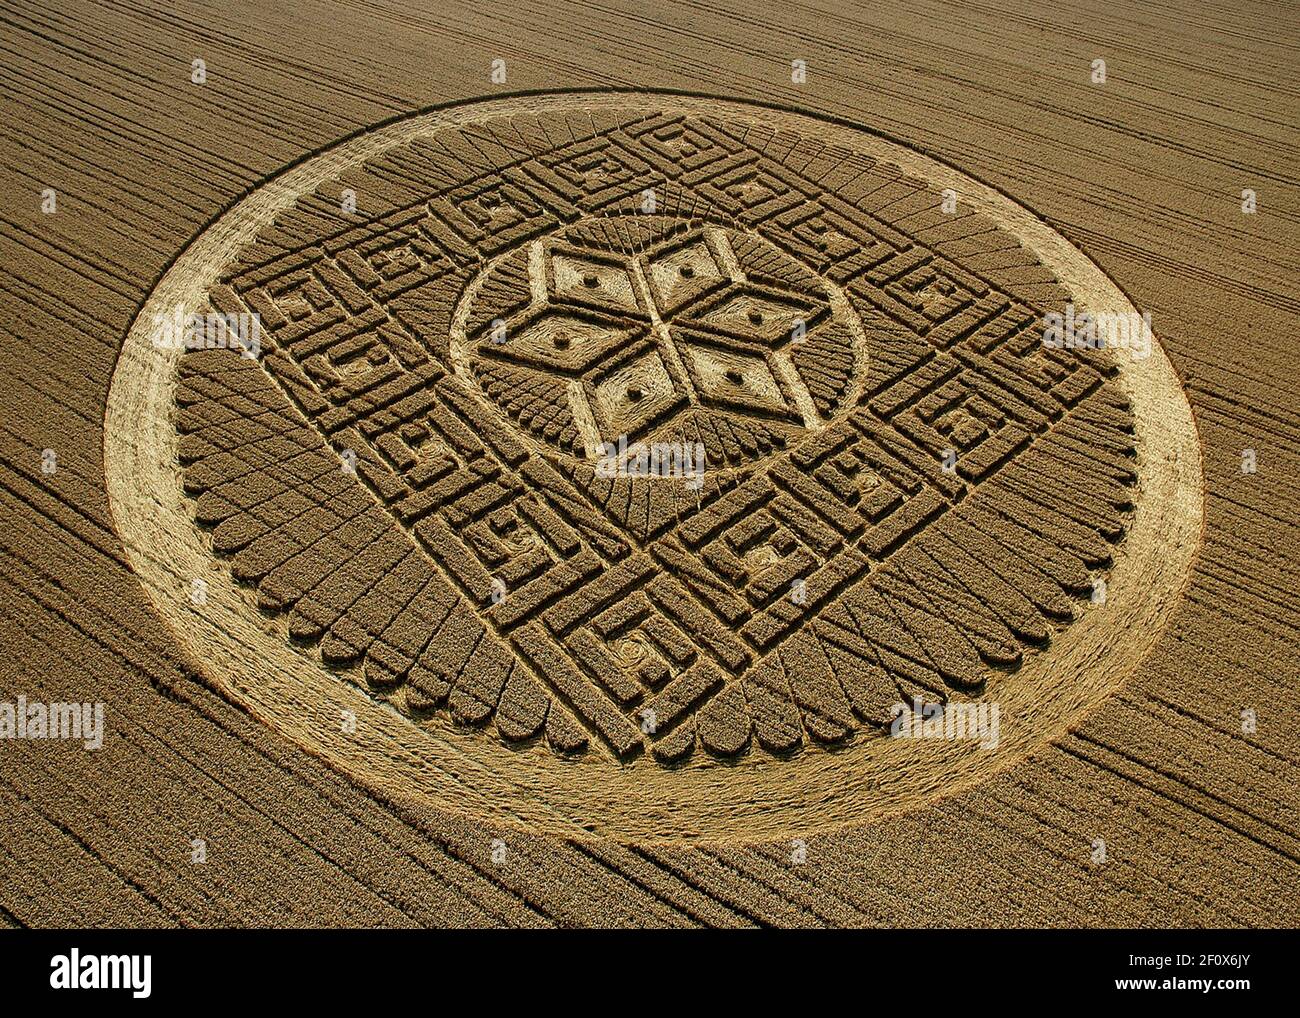 THE LARGEST AND MOST COMPLEX CROP CIRCLE OF THE YEAR HAS APPEARED AT WEYLANDS SMITHY IN WILTSHIRE. MEASURING OVER 300 FOOT ACROSS IT DEPICTS THE MAYAN CALANDER. 2005 Stock Photo